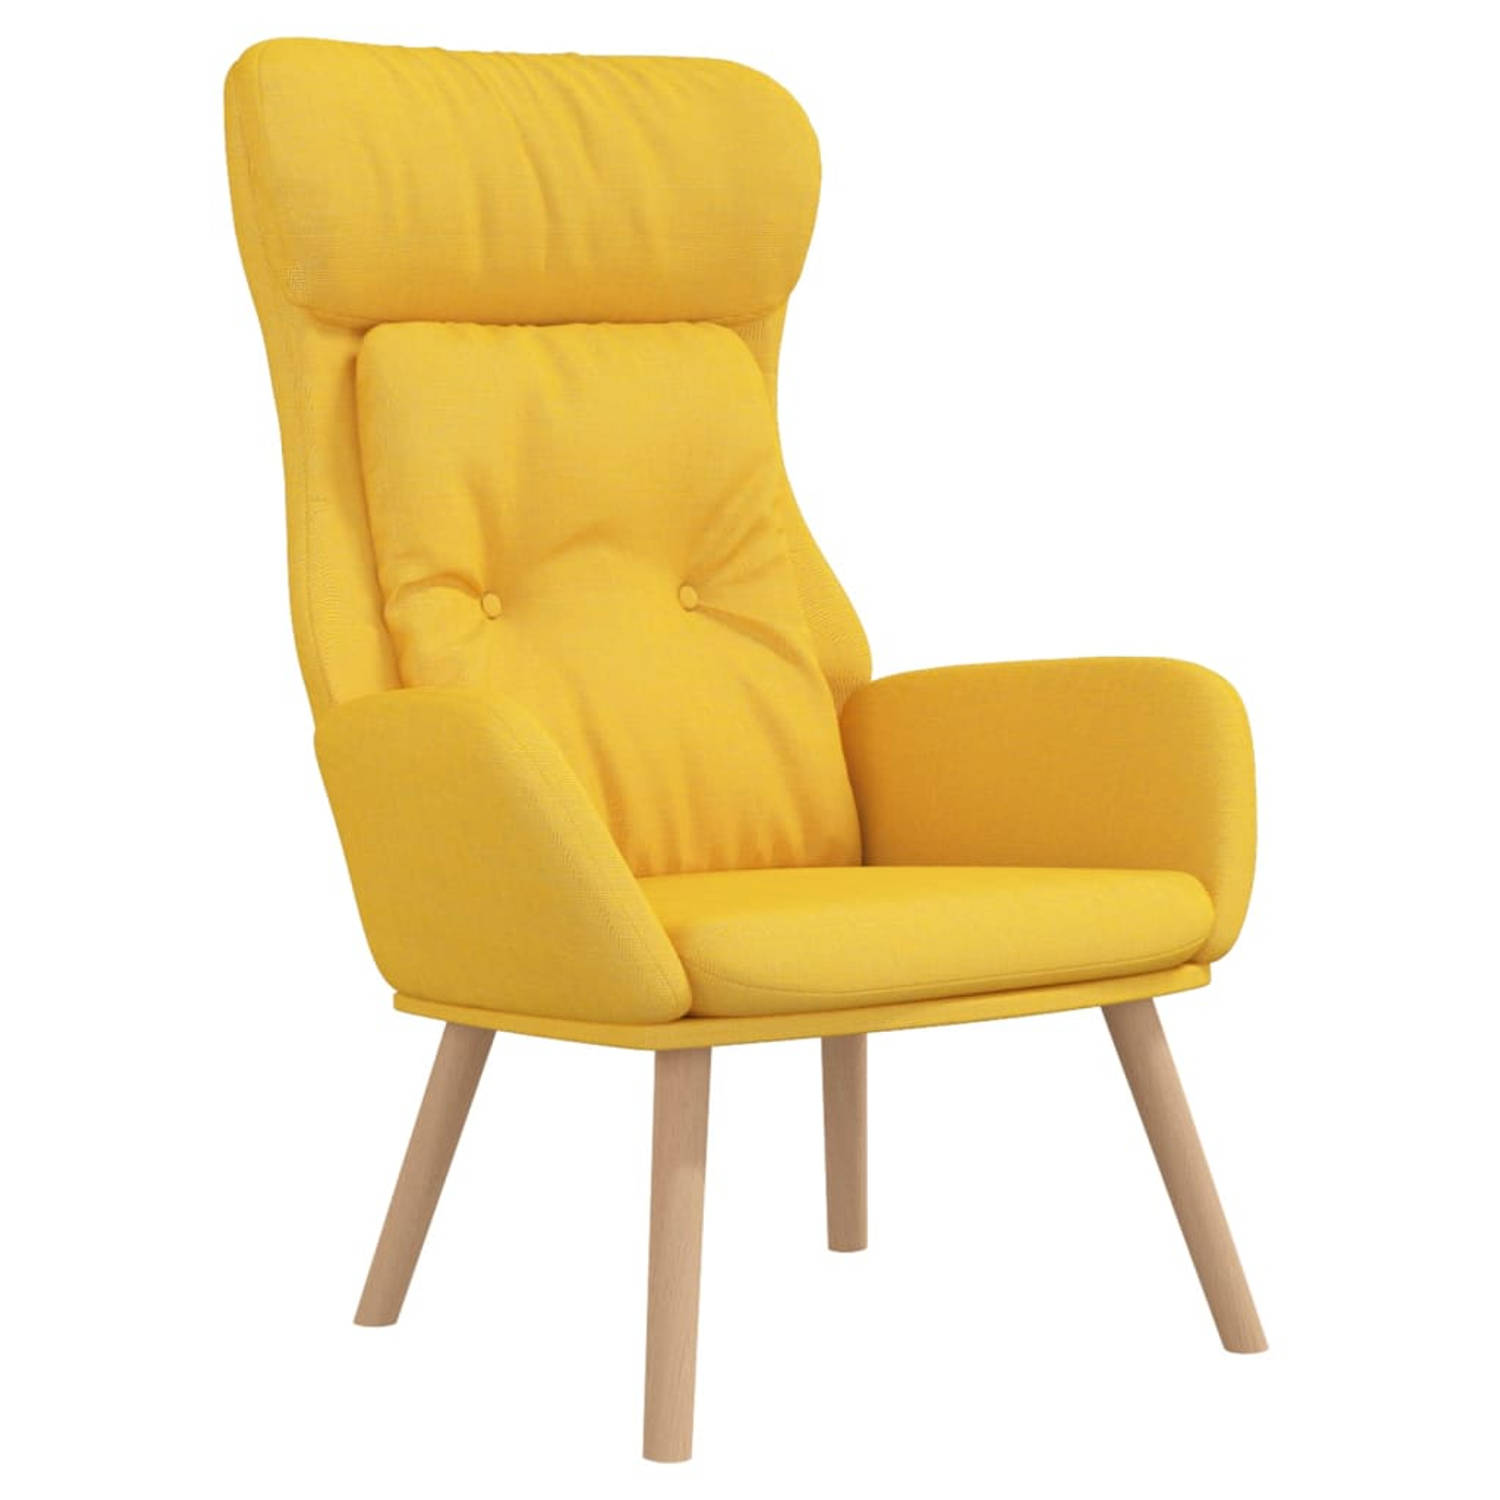 The Living Store Relaxstoel stof mosterdgeel - Fauteuil